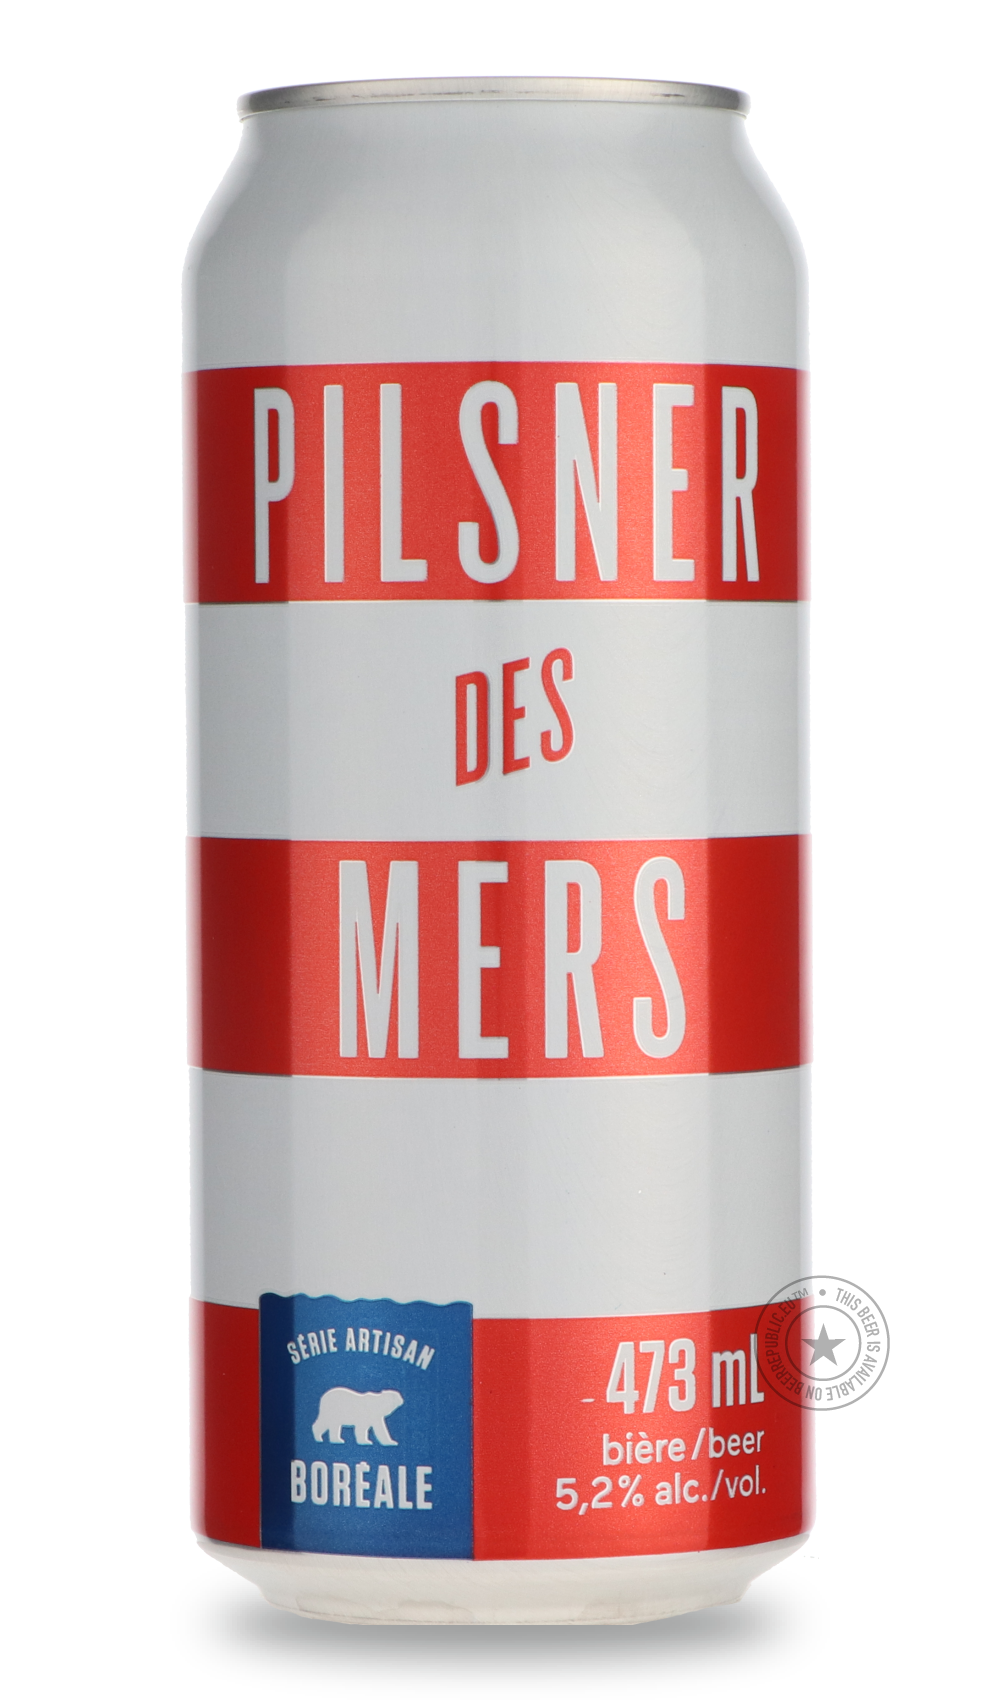 -Boréale- Pilsner Des Mers-Pale- Only @ Beer Republic - The best online beer store for American & Canadian craft beer - Buy beer online from the USA and Canada - Bier online kopen - Amerikaans bier kopen - Craft beer store - Craft beer kopen - Amerikanisch bier kaufen - Bier online kaufen - Acheter biere online - IPA - Stout - Porter - New England IPA - Hazy IPA - Imperial Stout - Barrel Aged - Barrel Aged Imperial Stout - Brown - Dark beer - Blond - Blonde - Pilsner - Lager - Wheat - Weizen - Amber - Barle